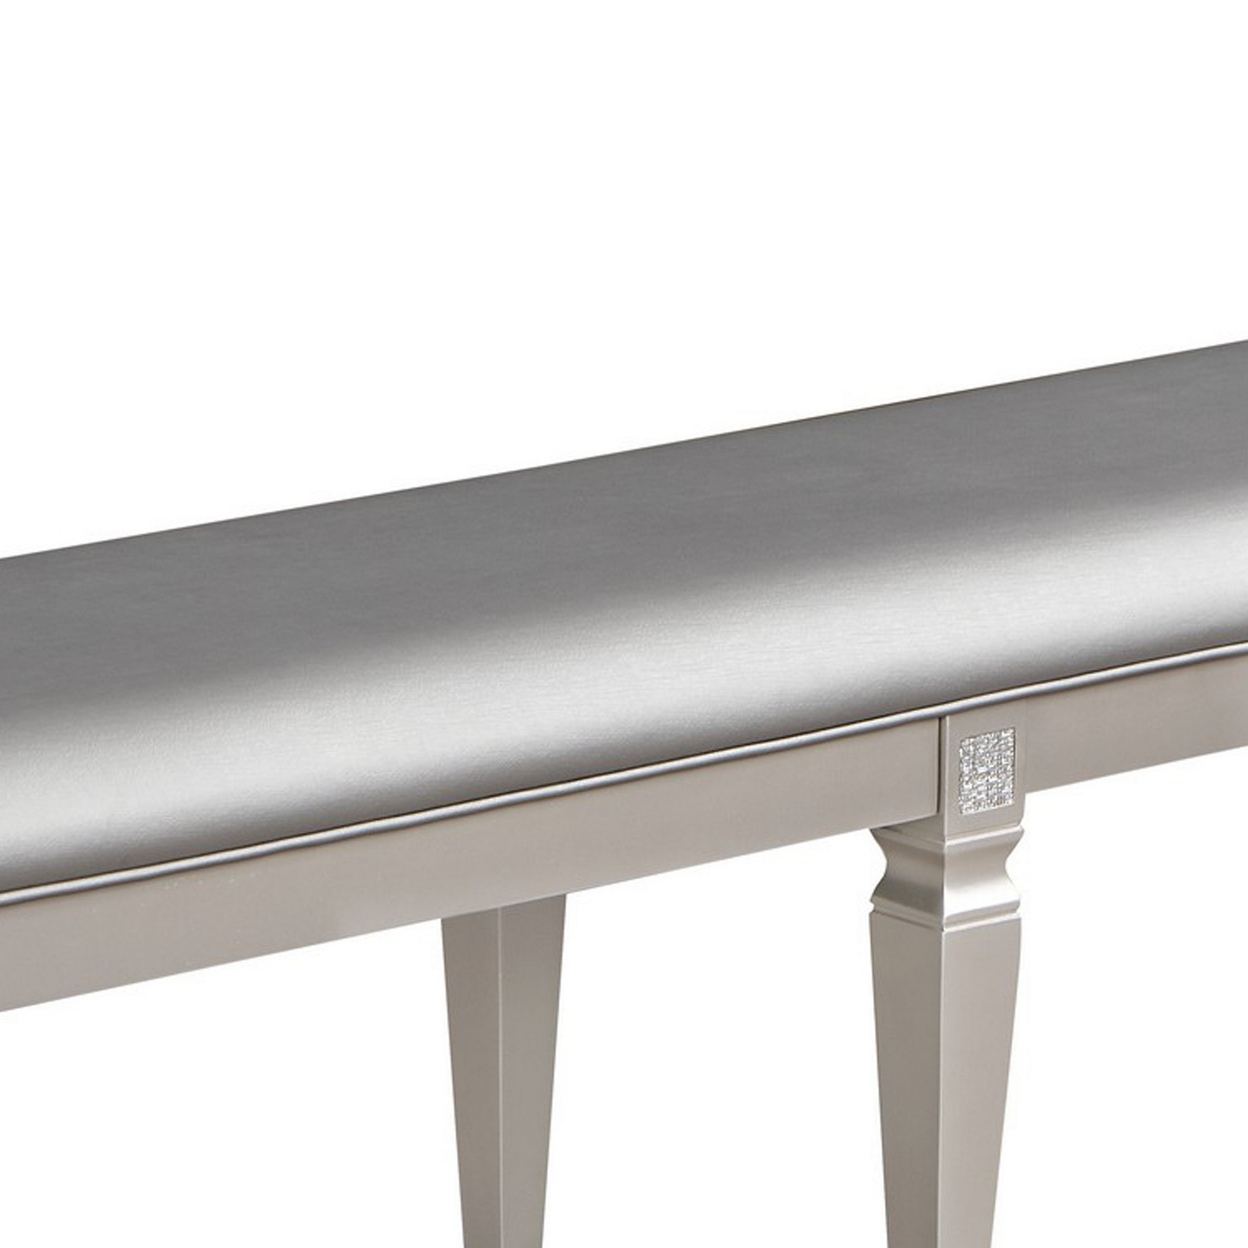 Scott 60 Inch Dining Bench, Sparkling Silver Gray Faux Leather, Wood Frame -Saltoro Sherpi